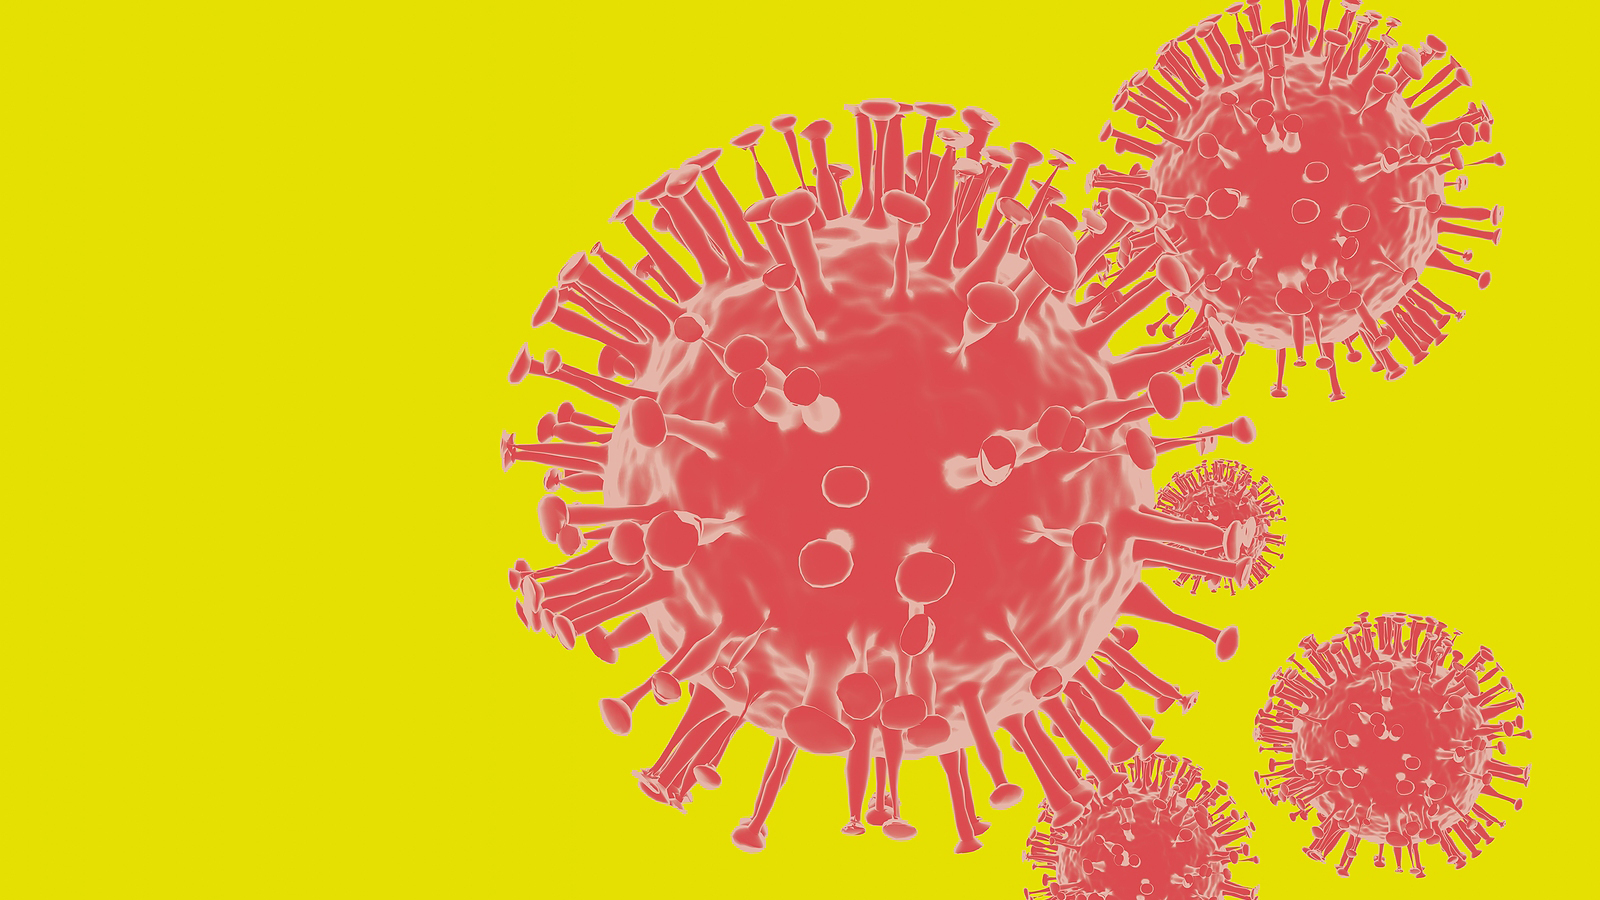 A rendering of a coronavirus molecule on a high contrast yellow background.